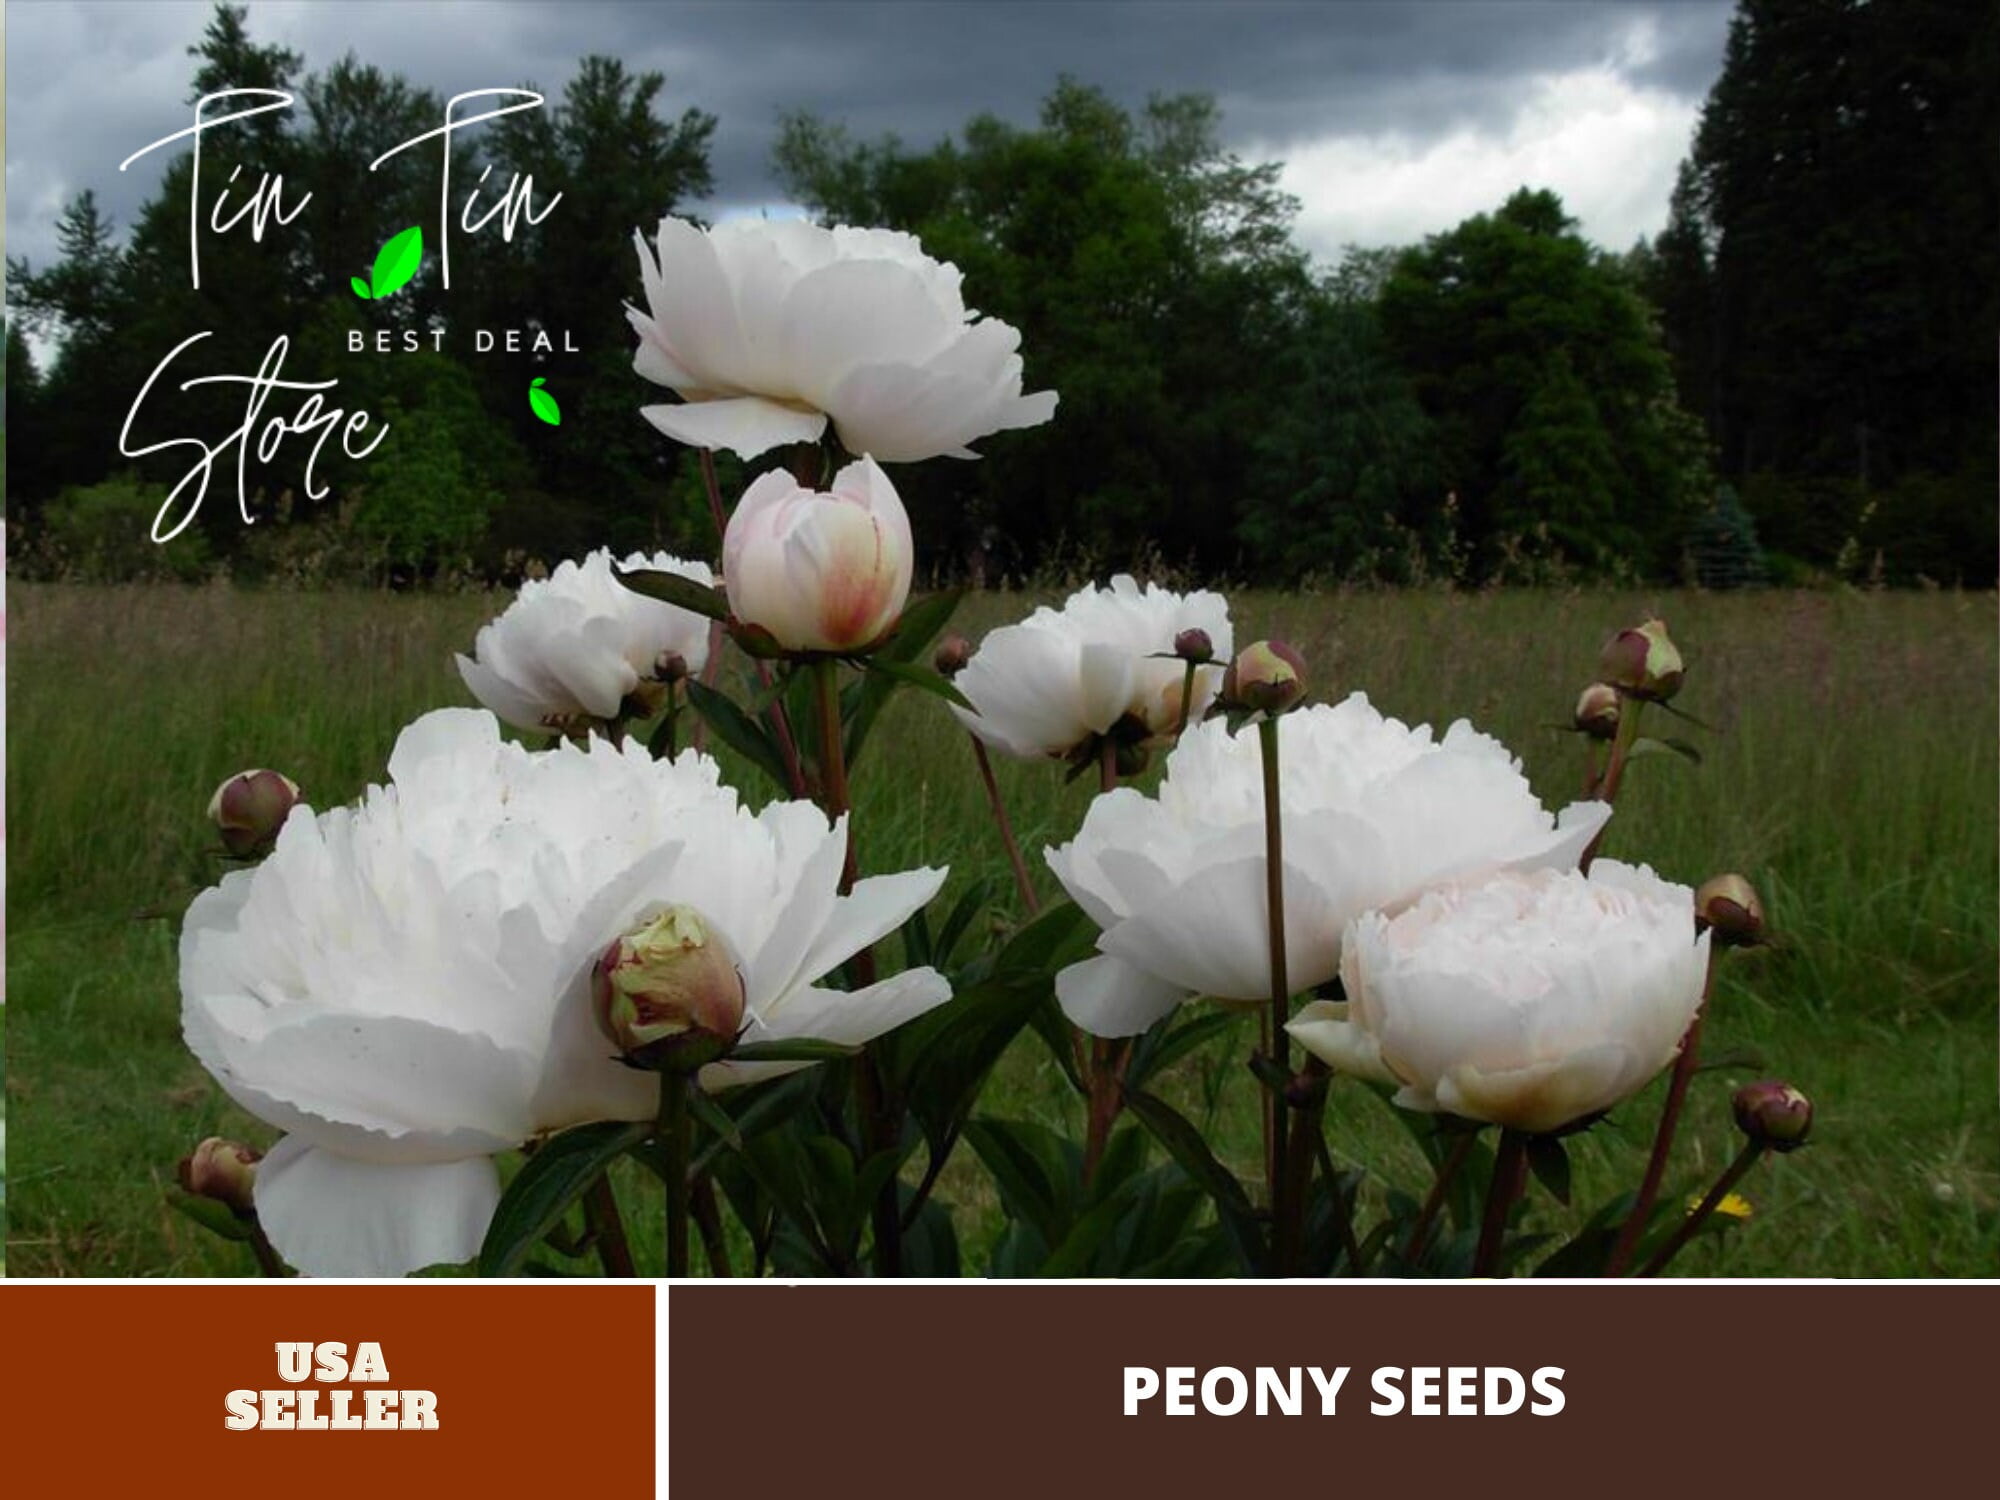 Peony seeds, I took this photo in Sweden., Bjorn E